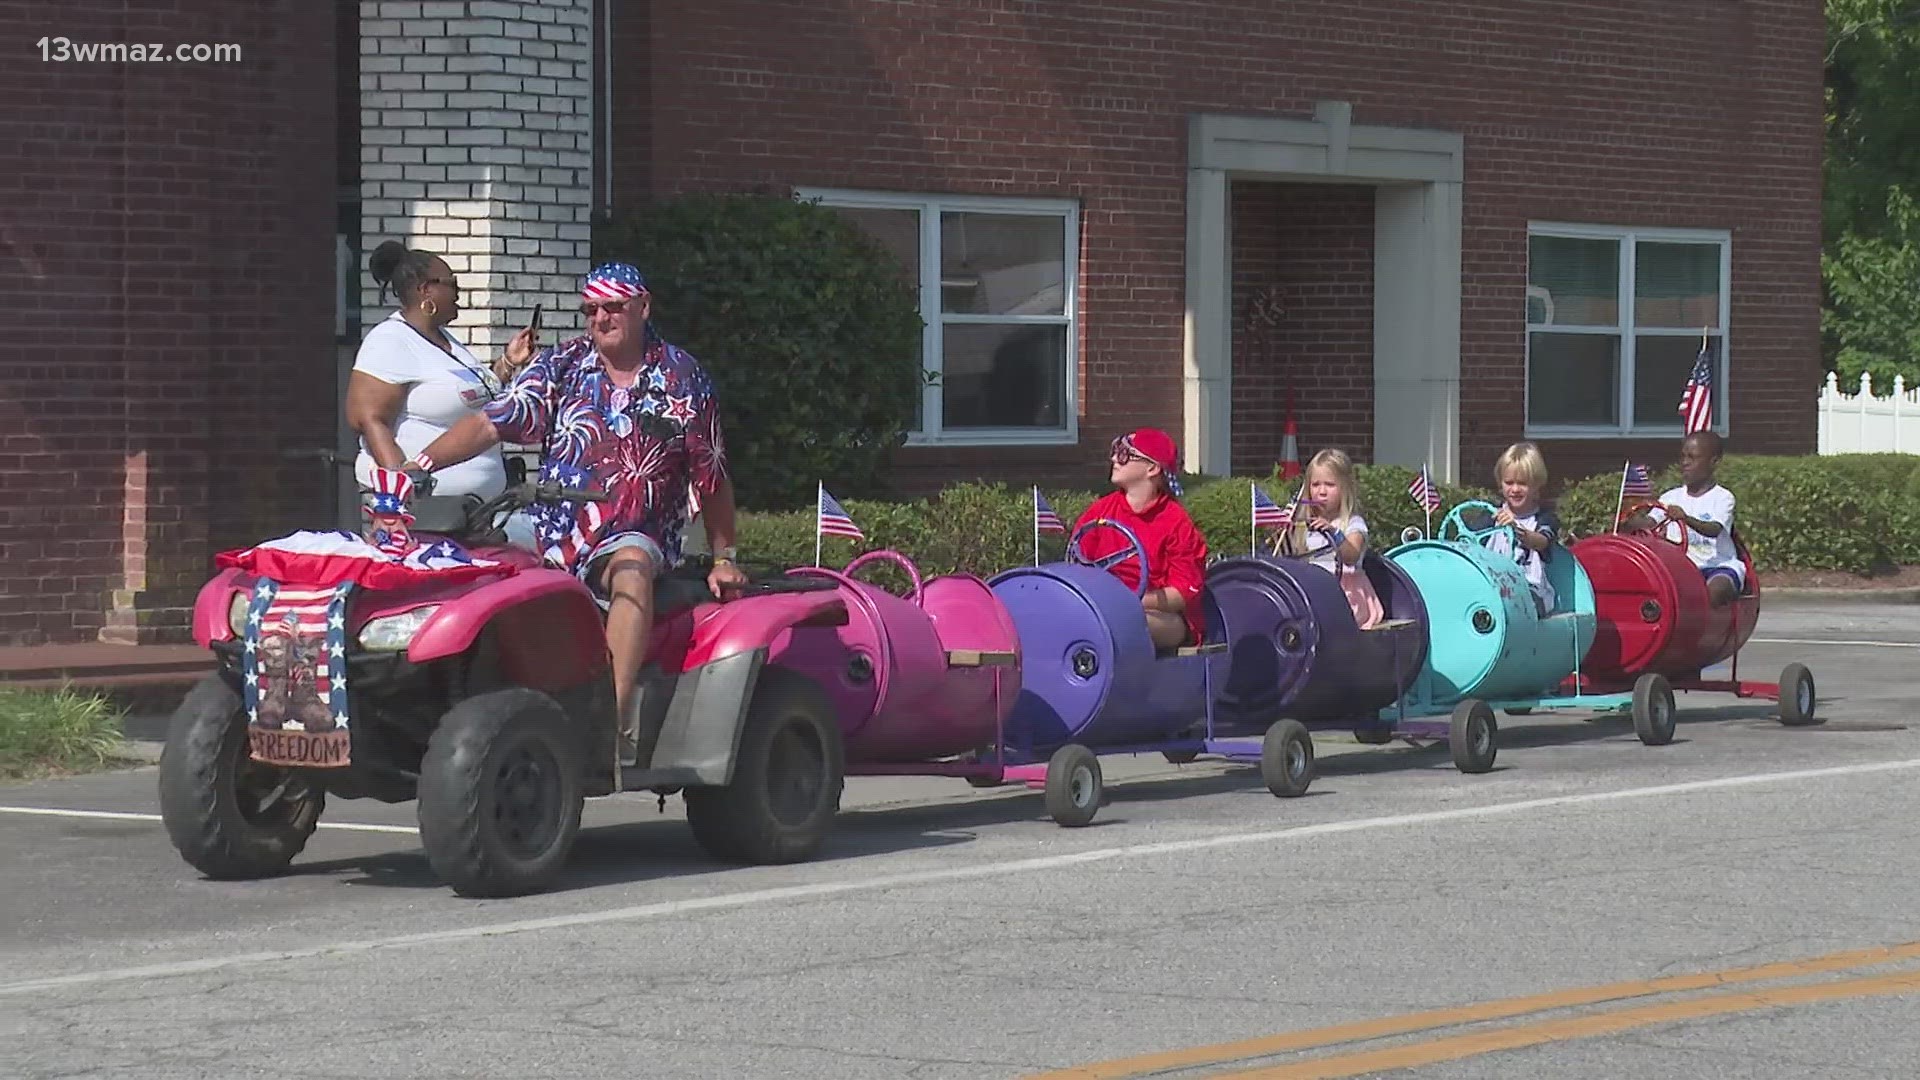 The parade aims to bring people together to celebrate the fourth of July holiday and strengthen the community bond.